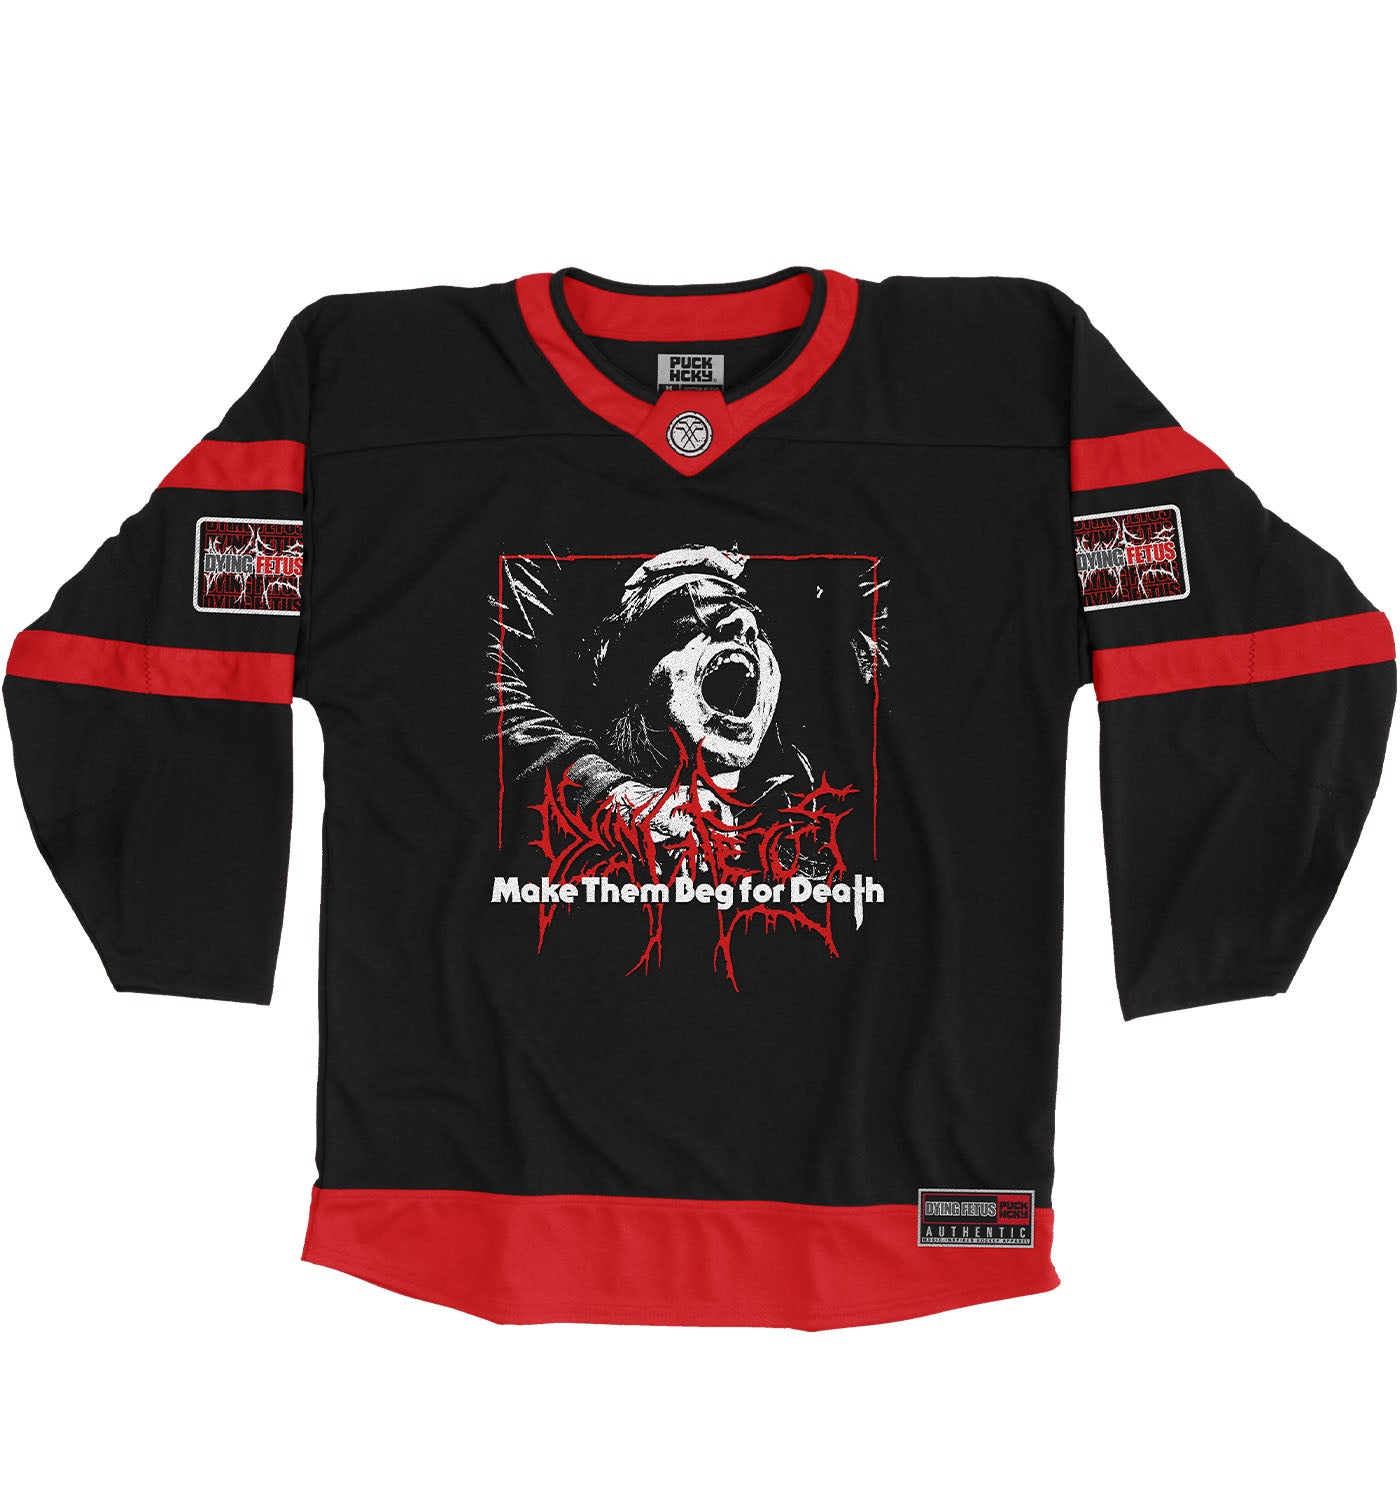 Might be the first person to own one of these : r/hockeyjerseys